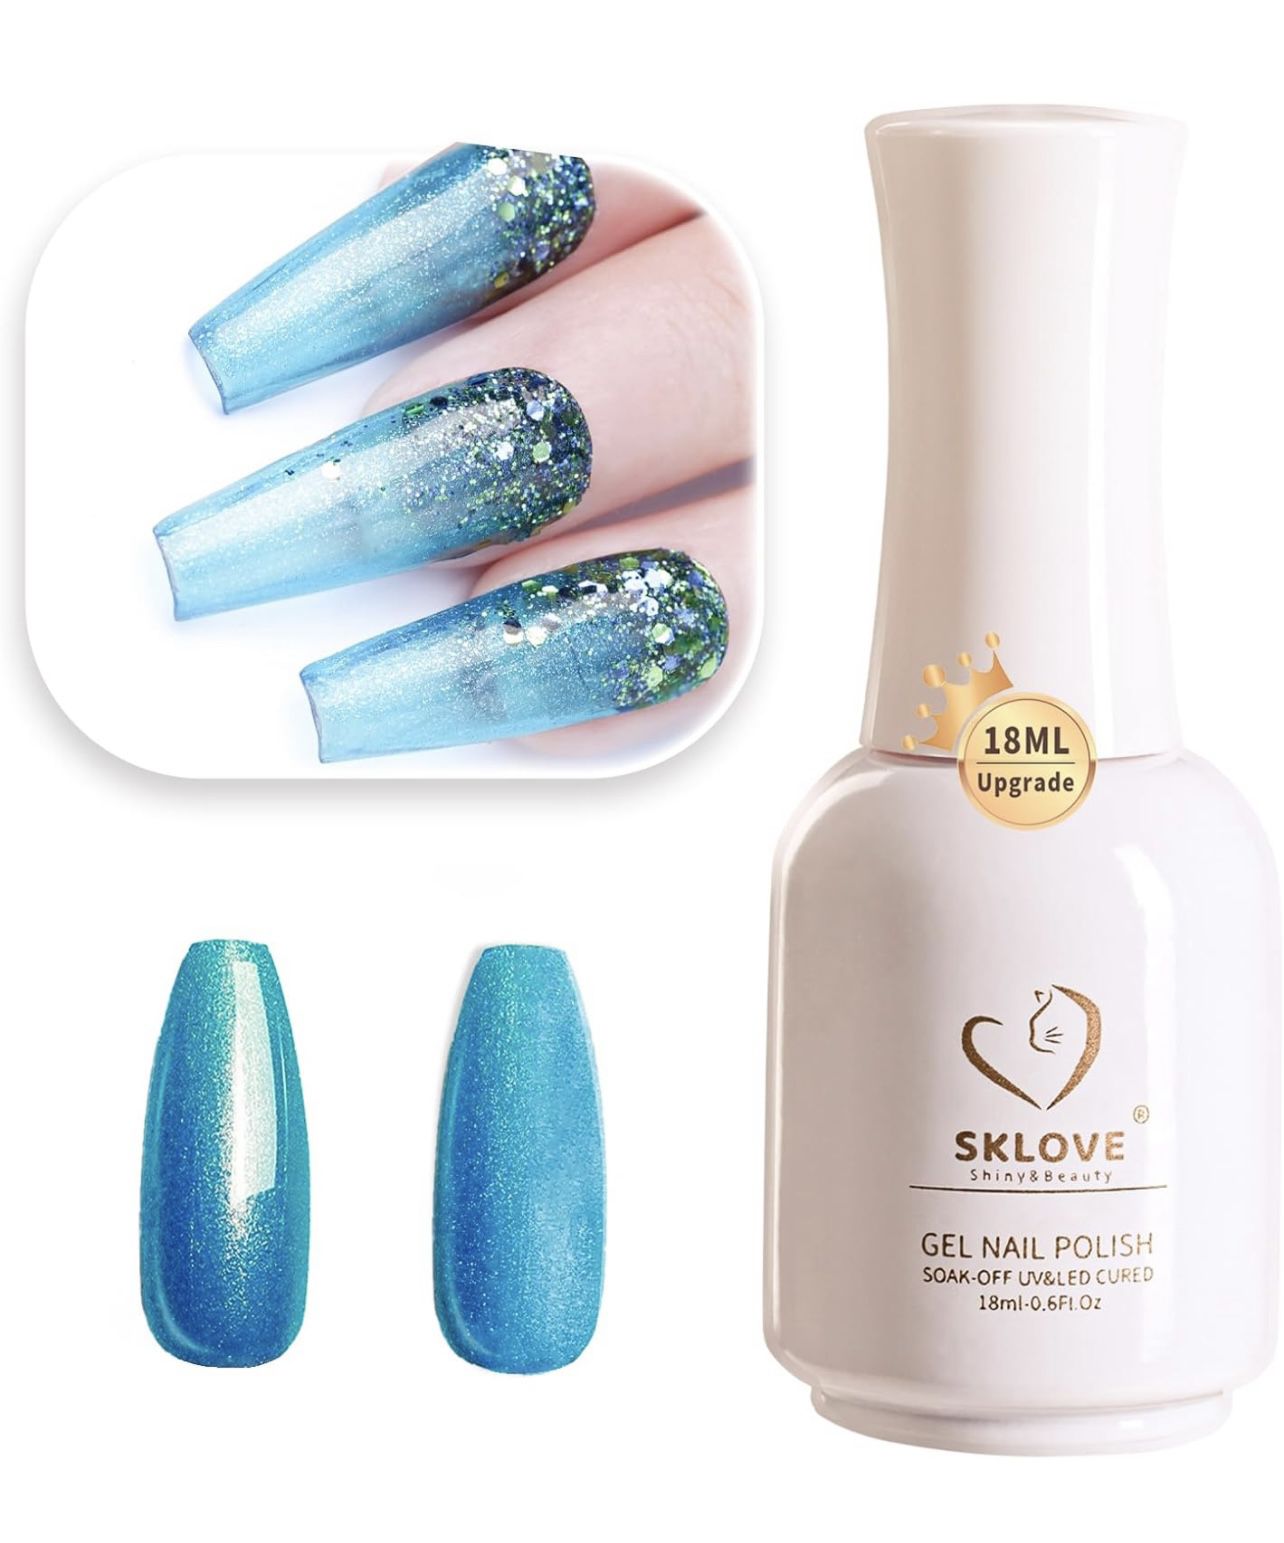 Gel Nail Polish, 3 different colors Ivory White Glitter, Light Brown, and Ocean Blue Glitter 